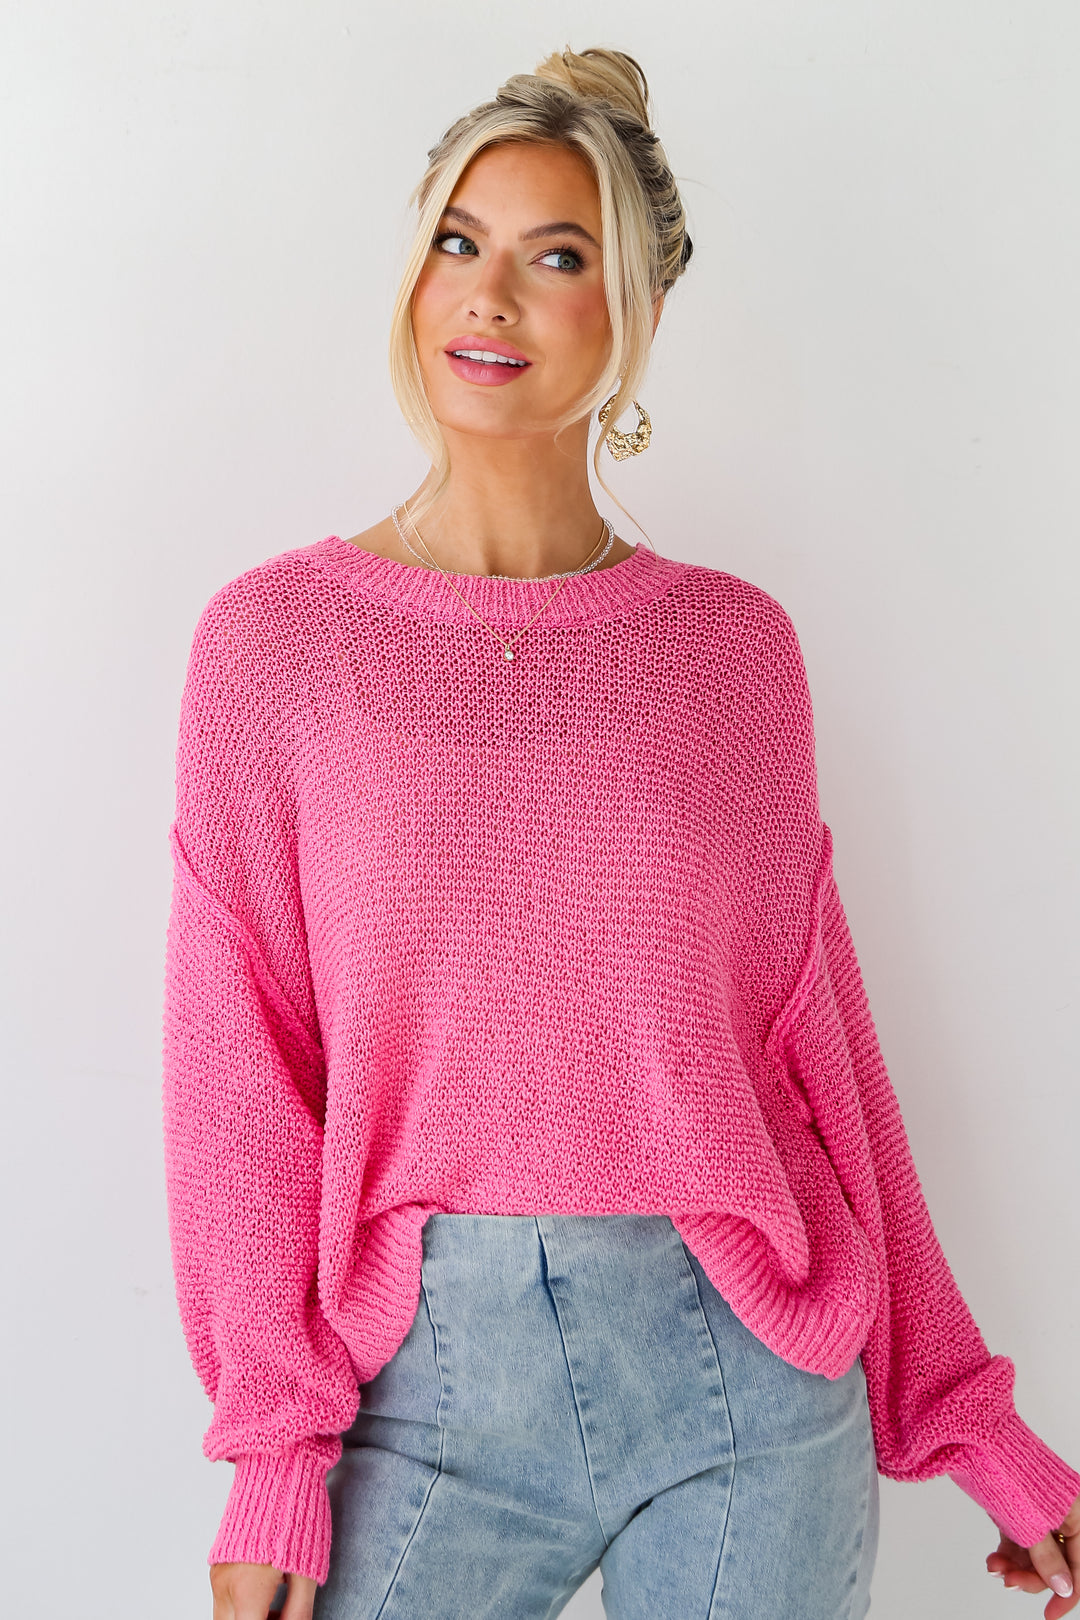 lightweight knit top for spring